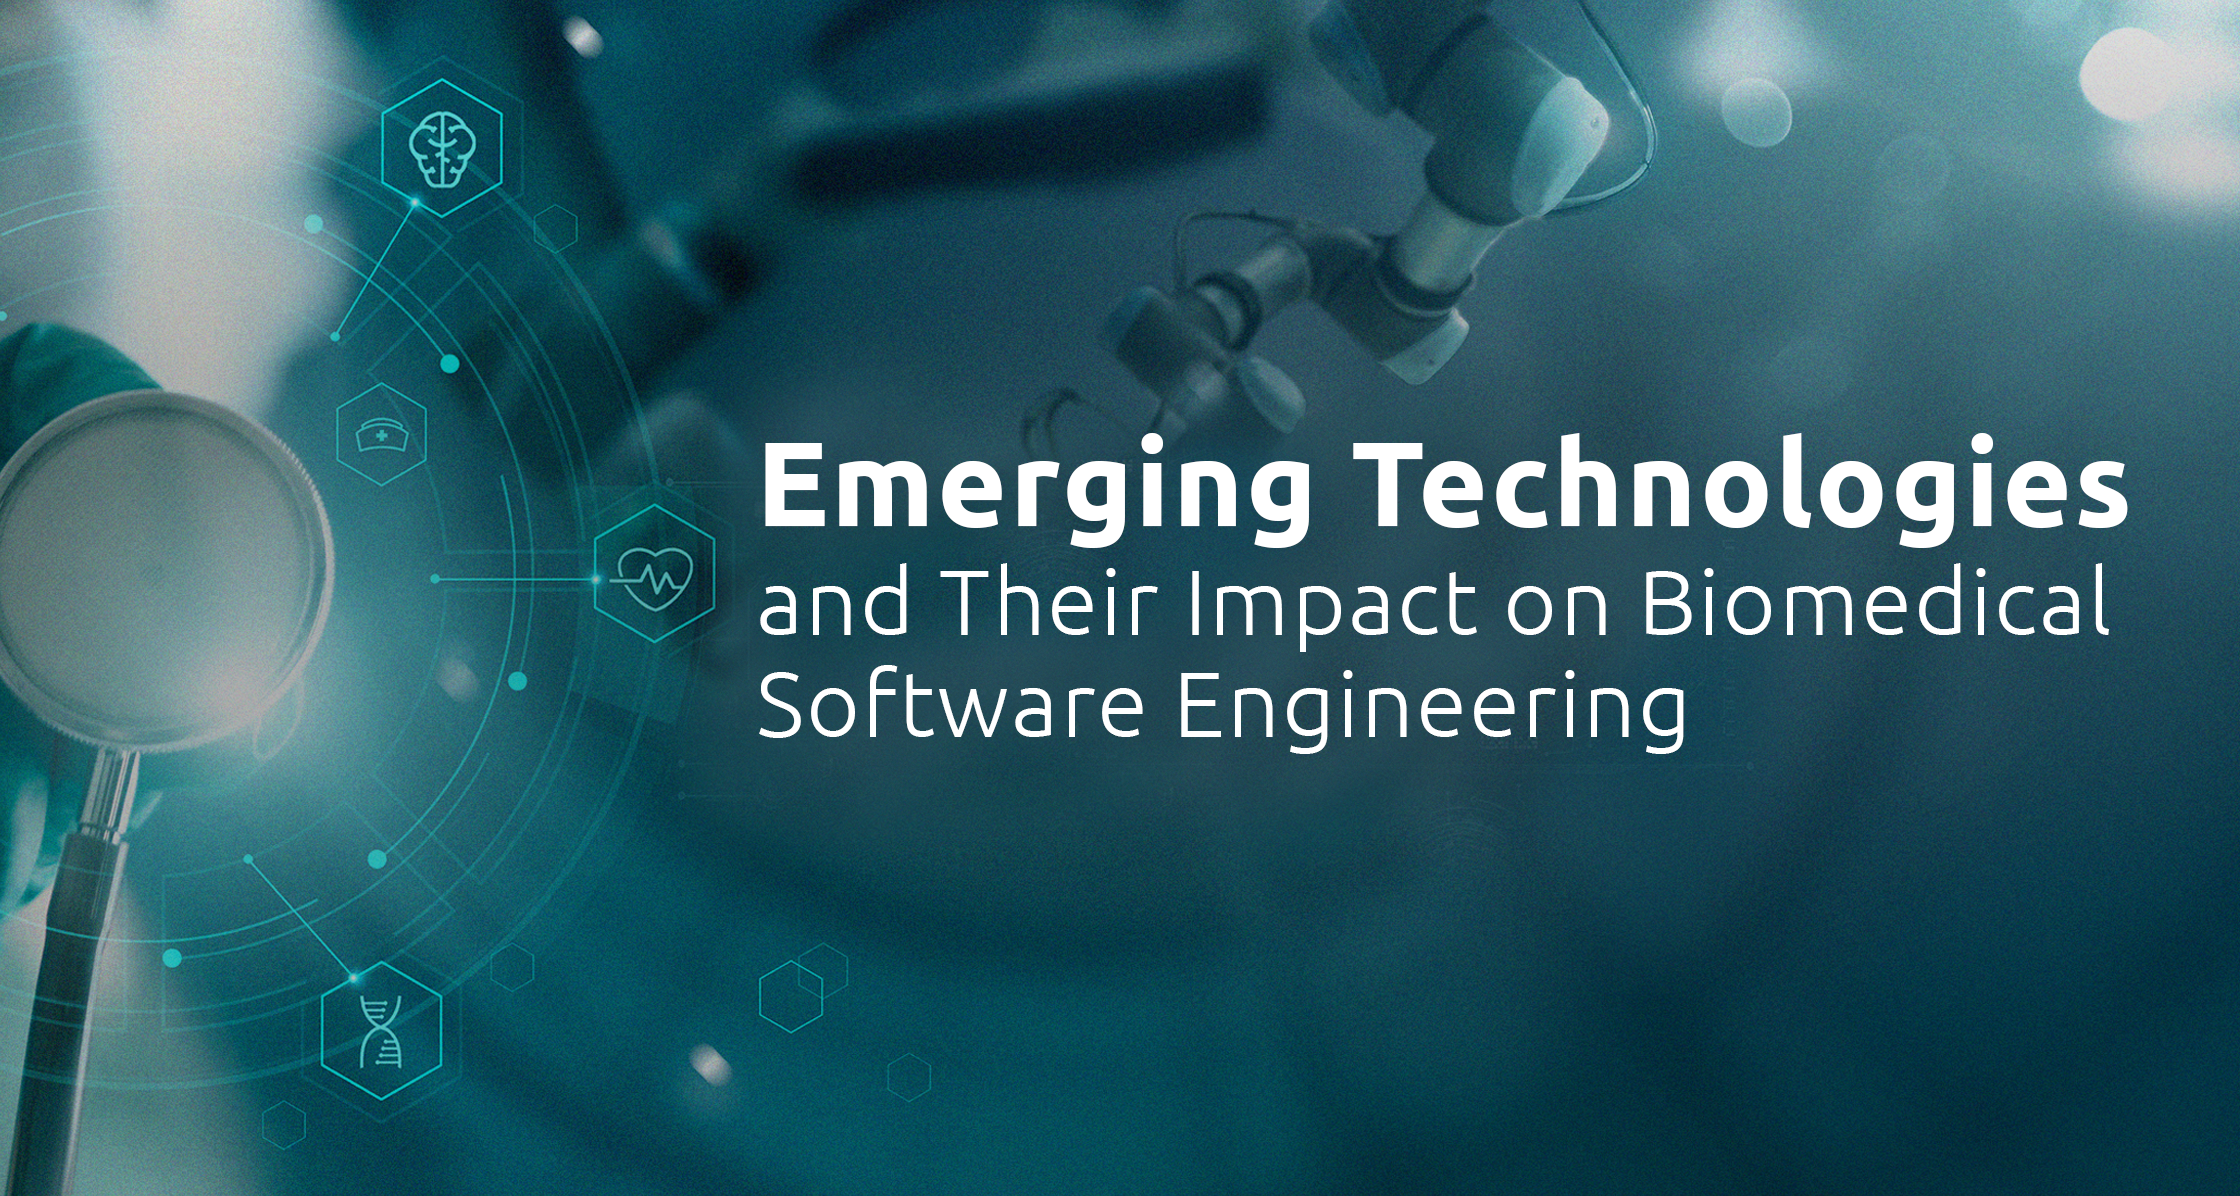 Emerging technologies and their impact in biomedical software engineering